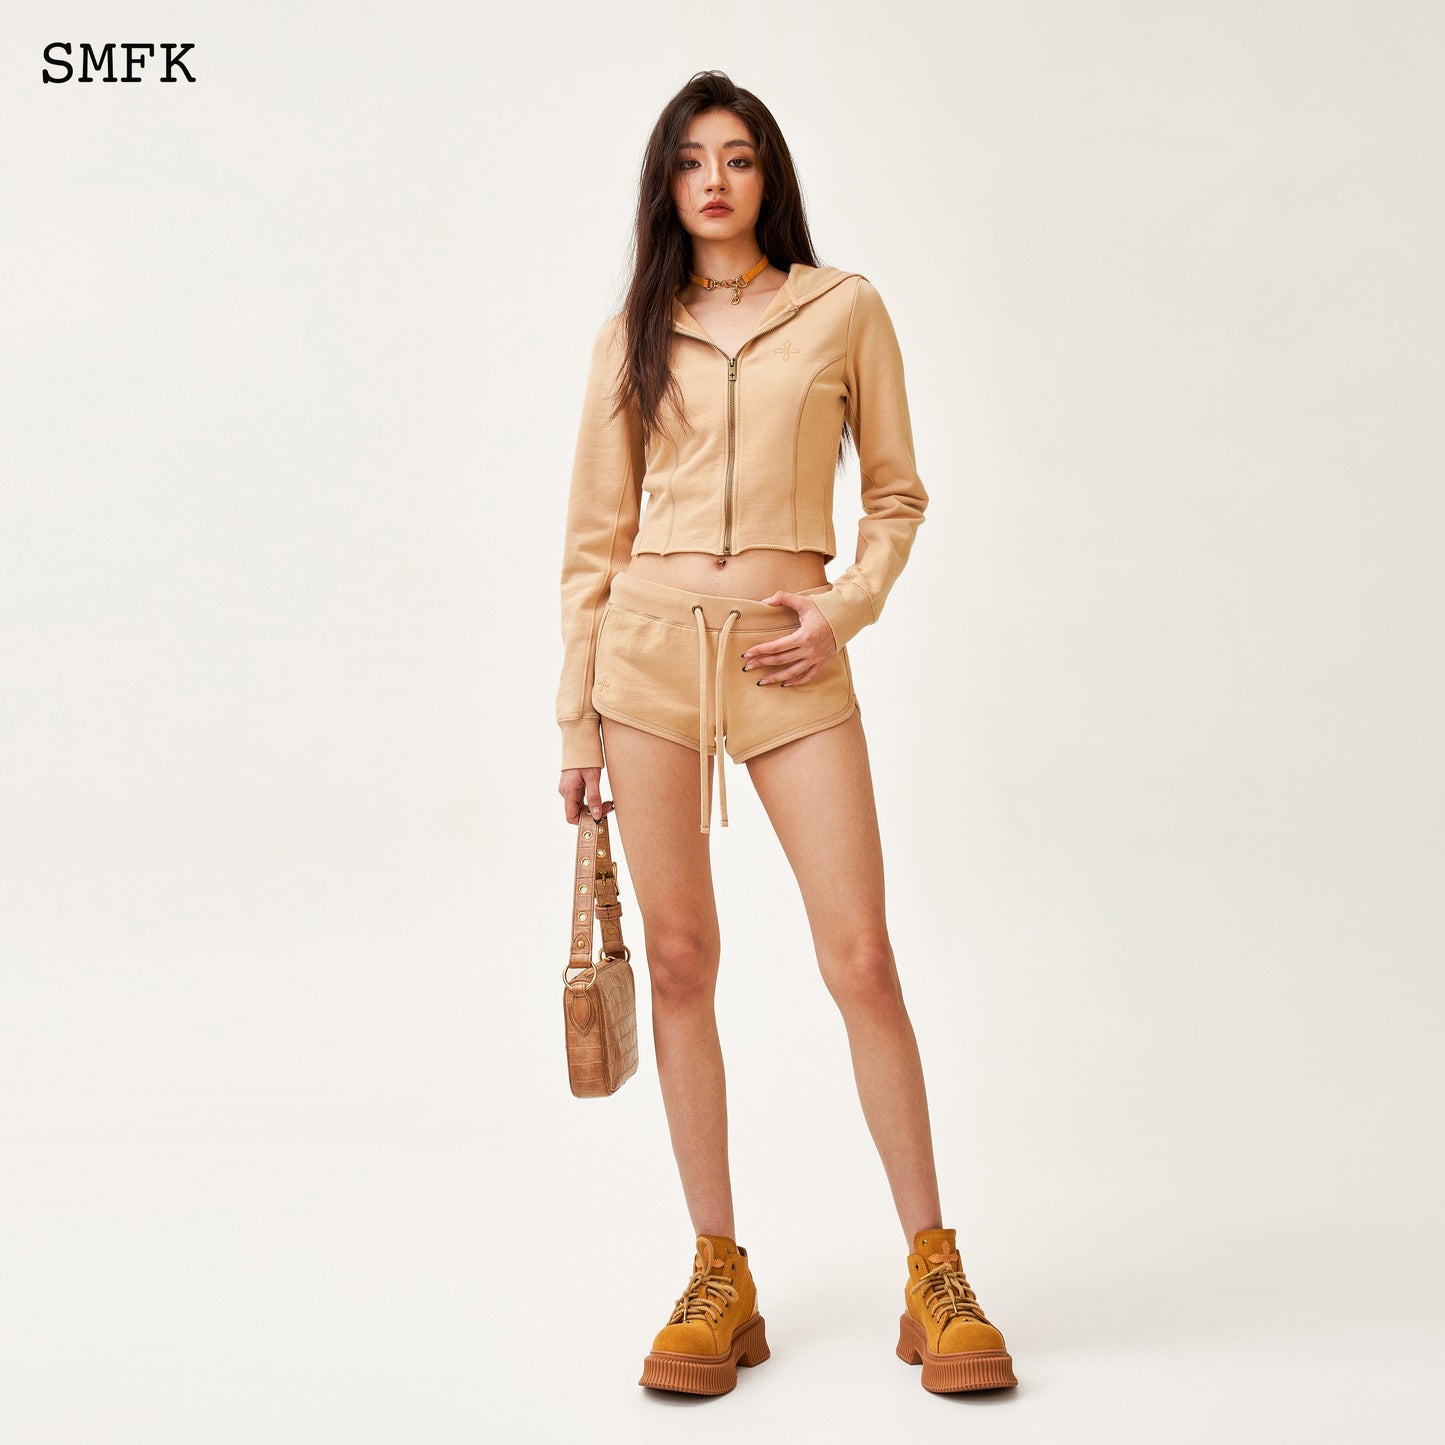 SMFK Compass Rove Stray Low-rise Running Shorts Sand